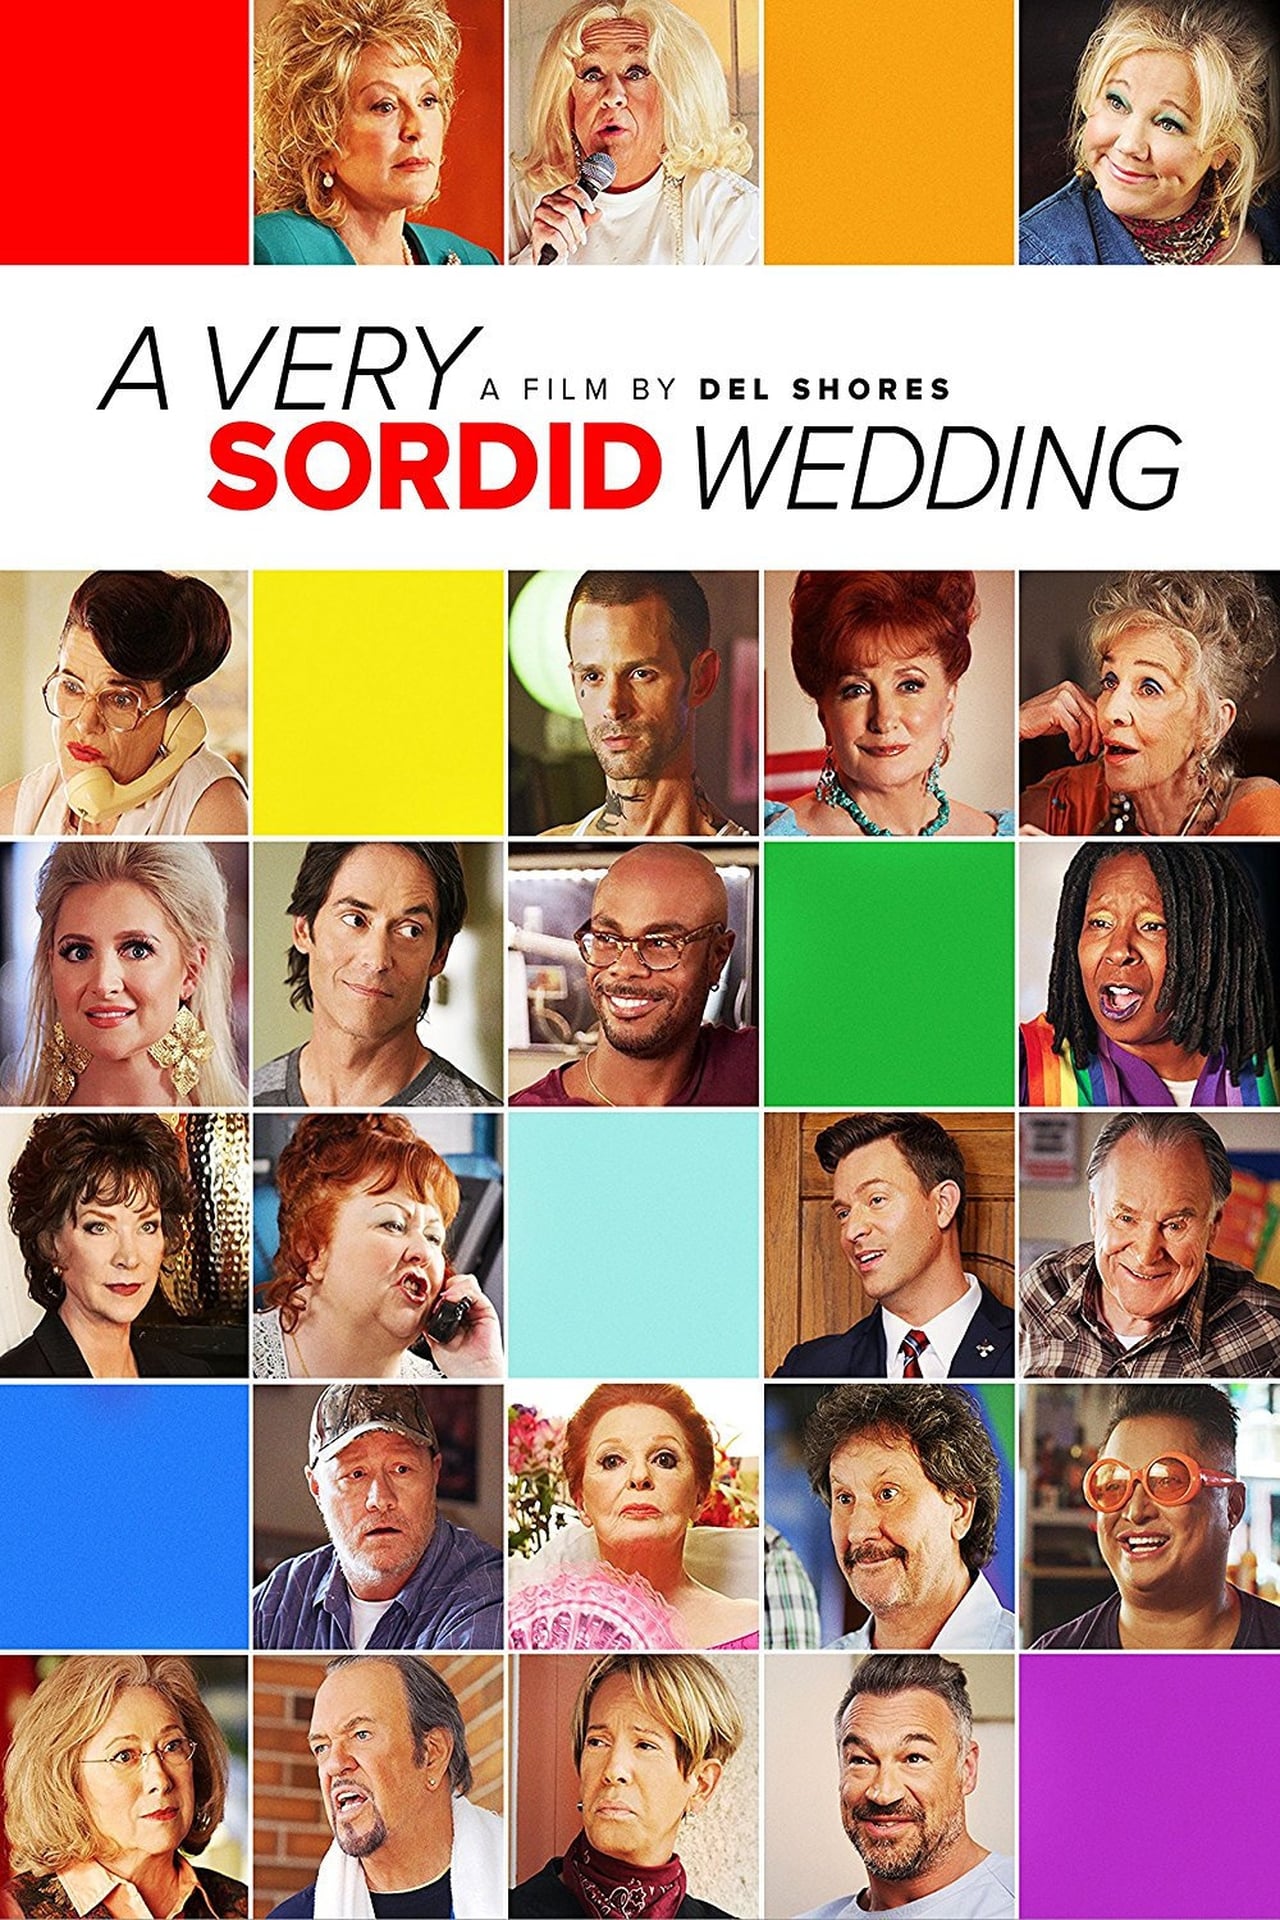 A Very Sordid Wedding wiki, synopsis, reviews, watch and download